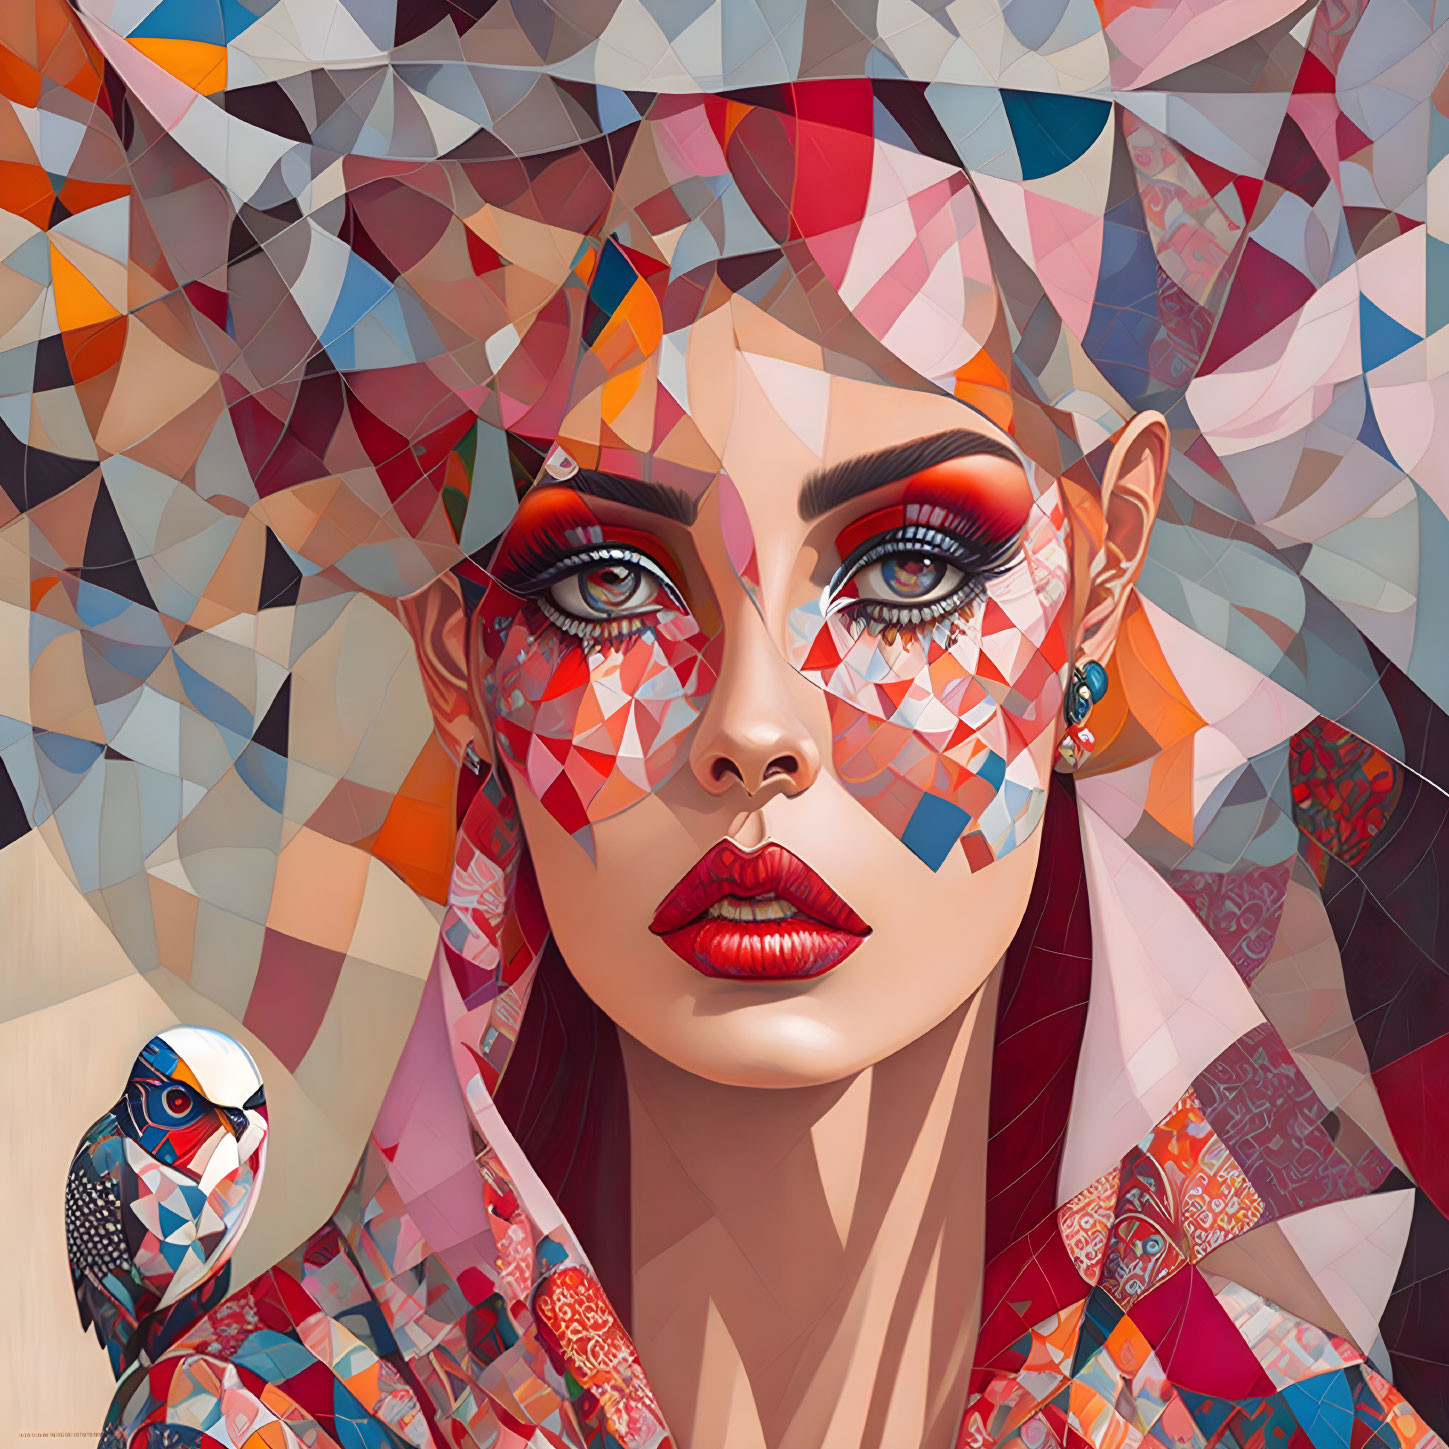 Polygonal-style portrait of woman with sharp features and makeup and parrot on shoulder